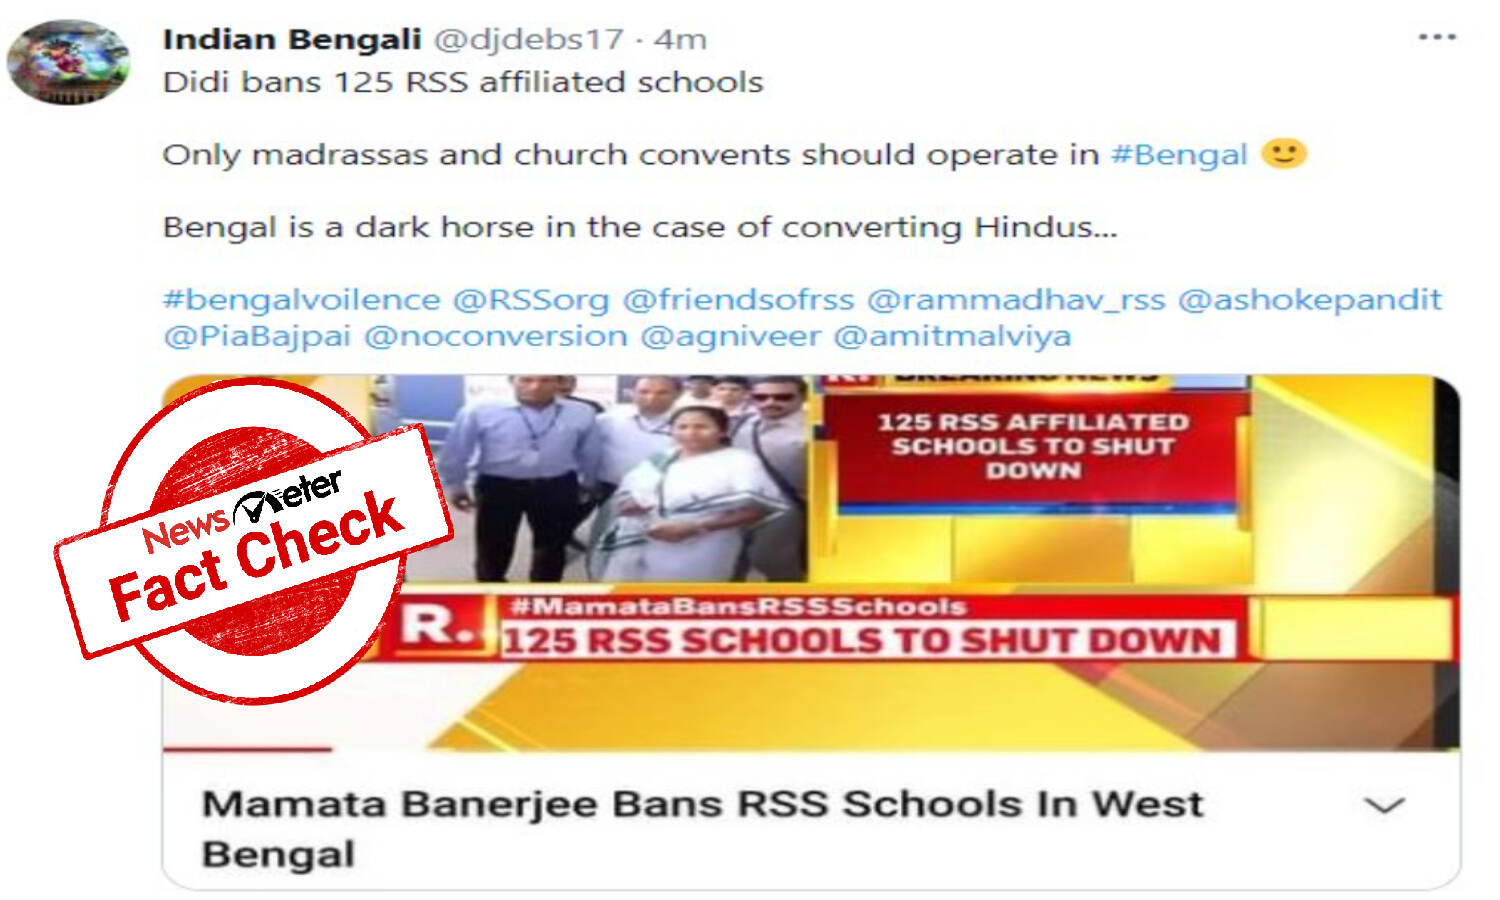 WB government shutting 125 RSS schools is old news